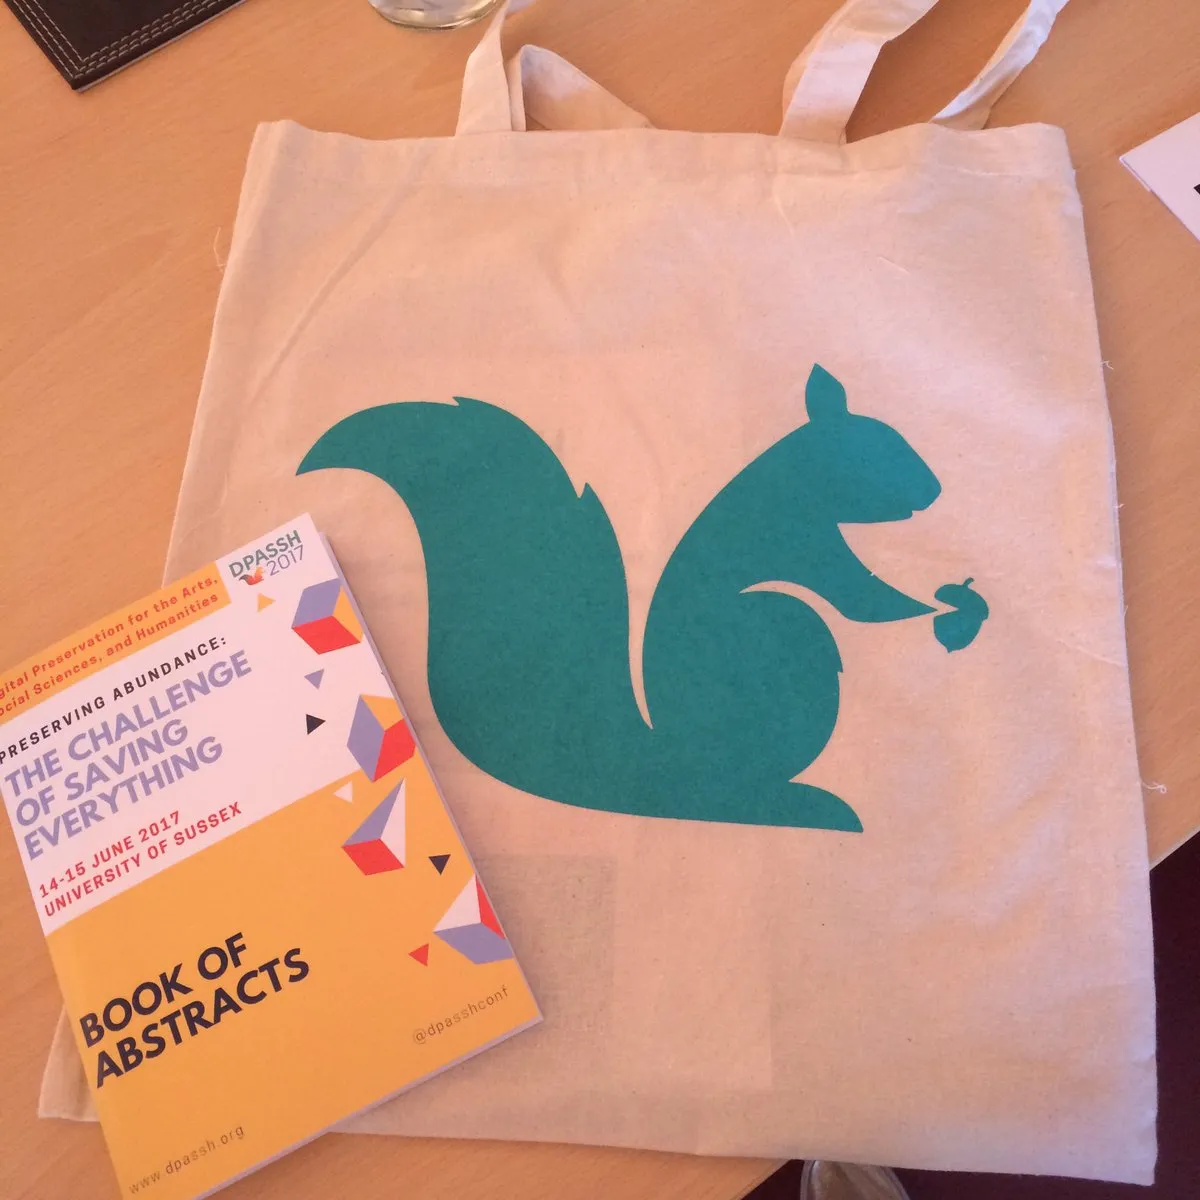 Dpassh tote and book of abstracts